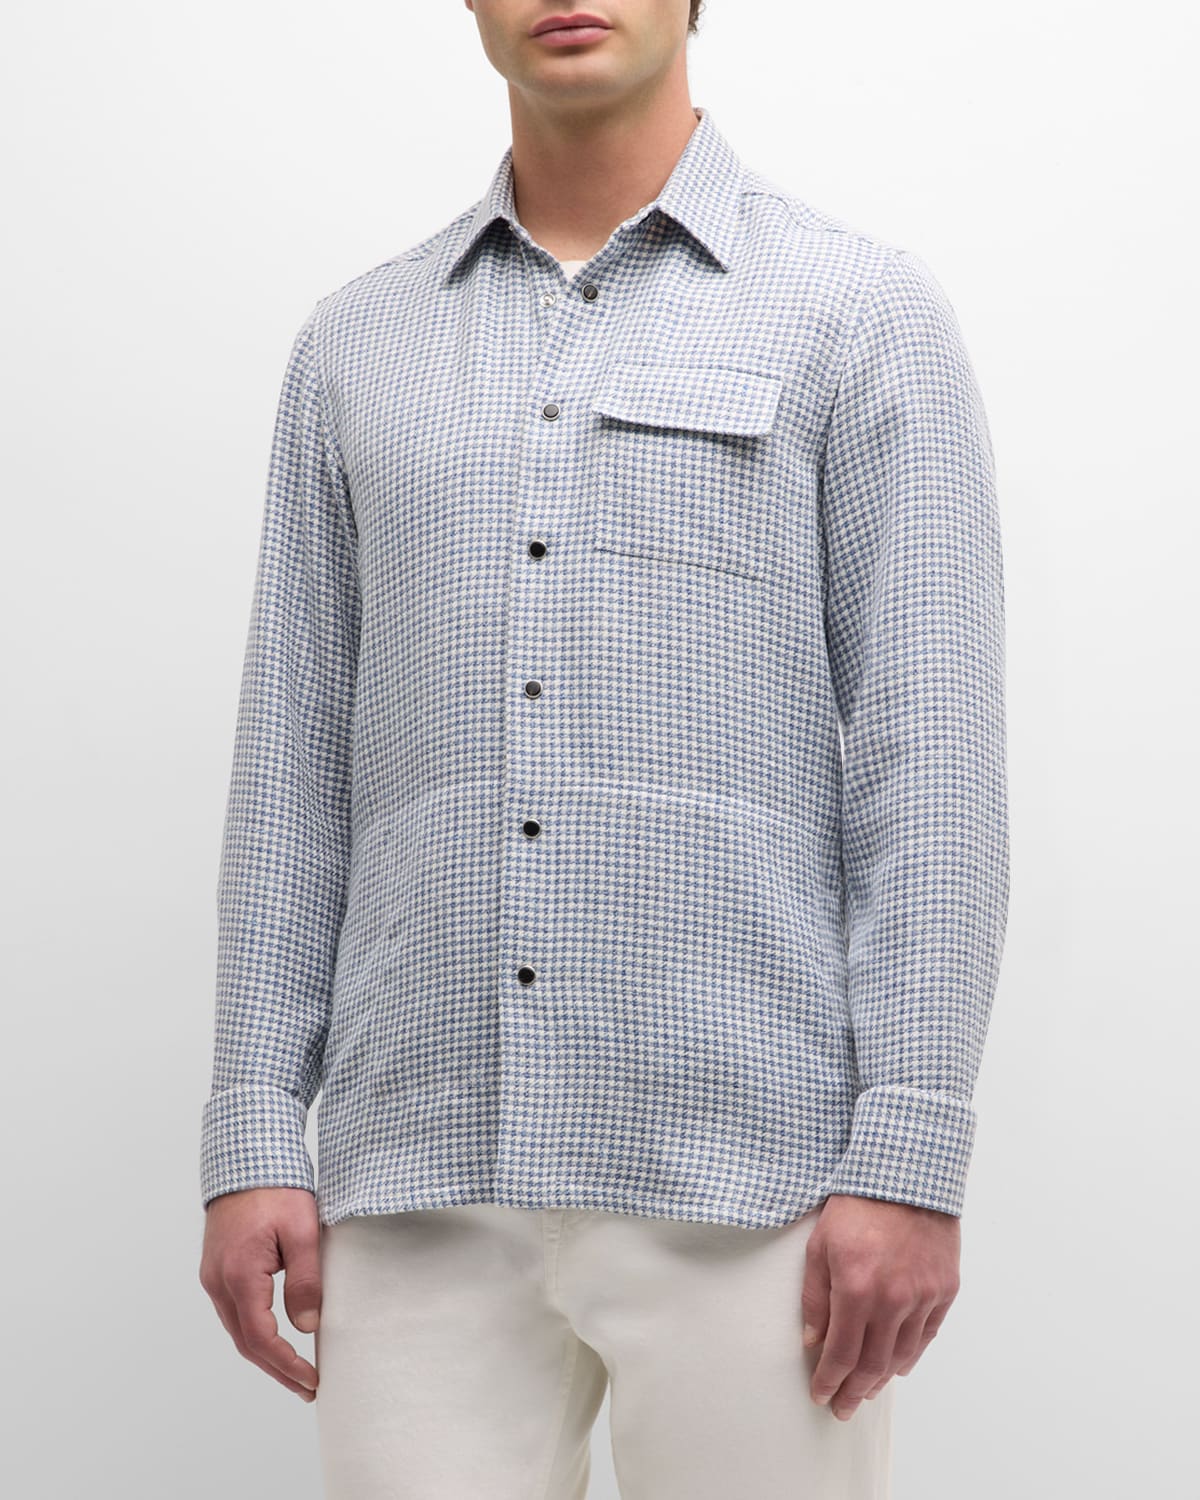 Kiton Men's Micro-houndstooth Overshirt In Blue Multi